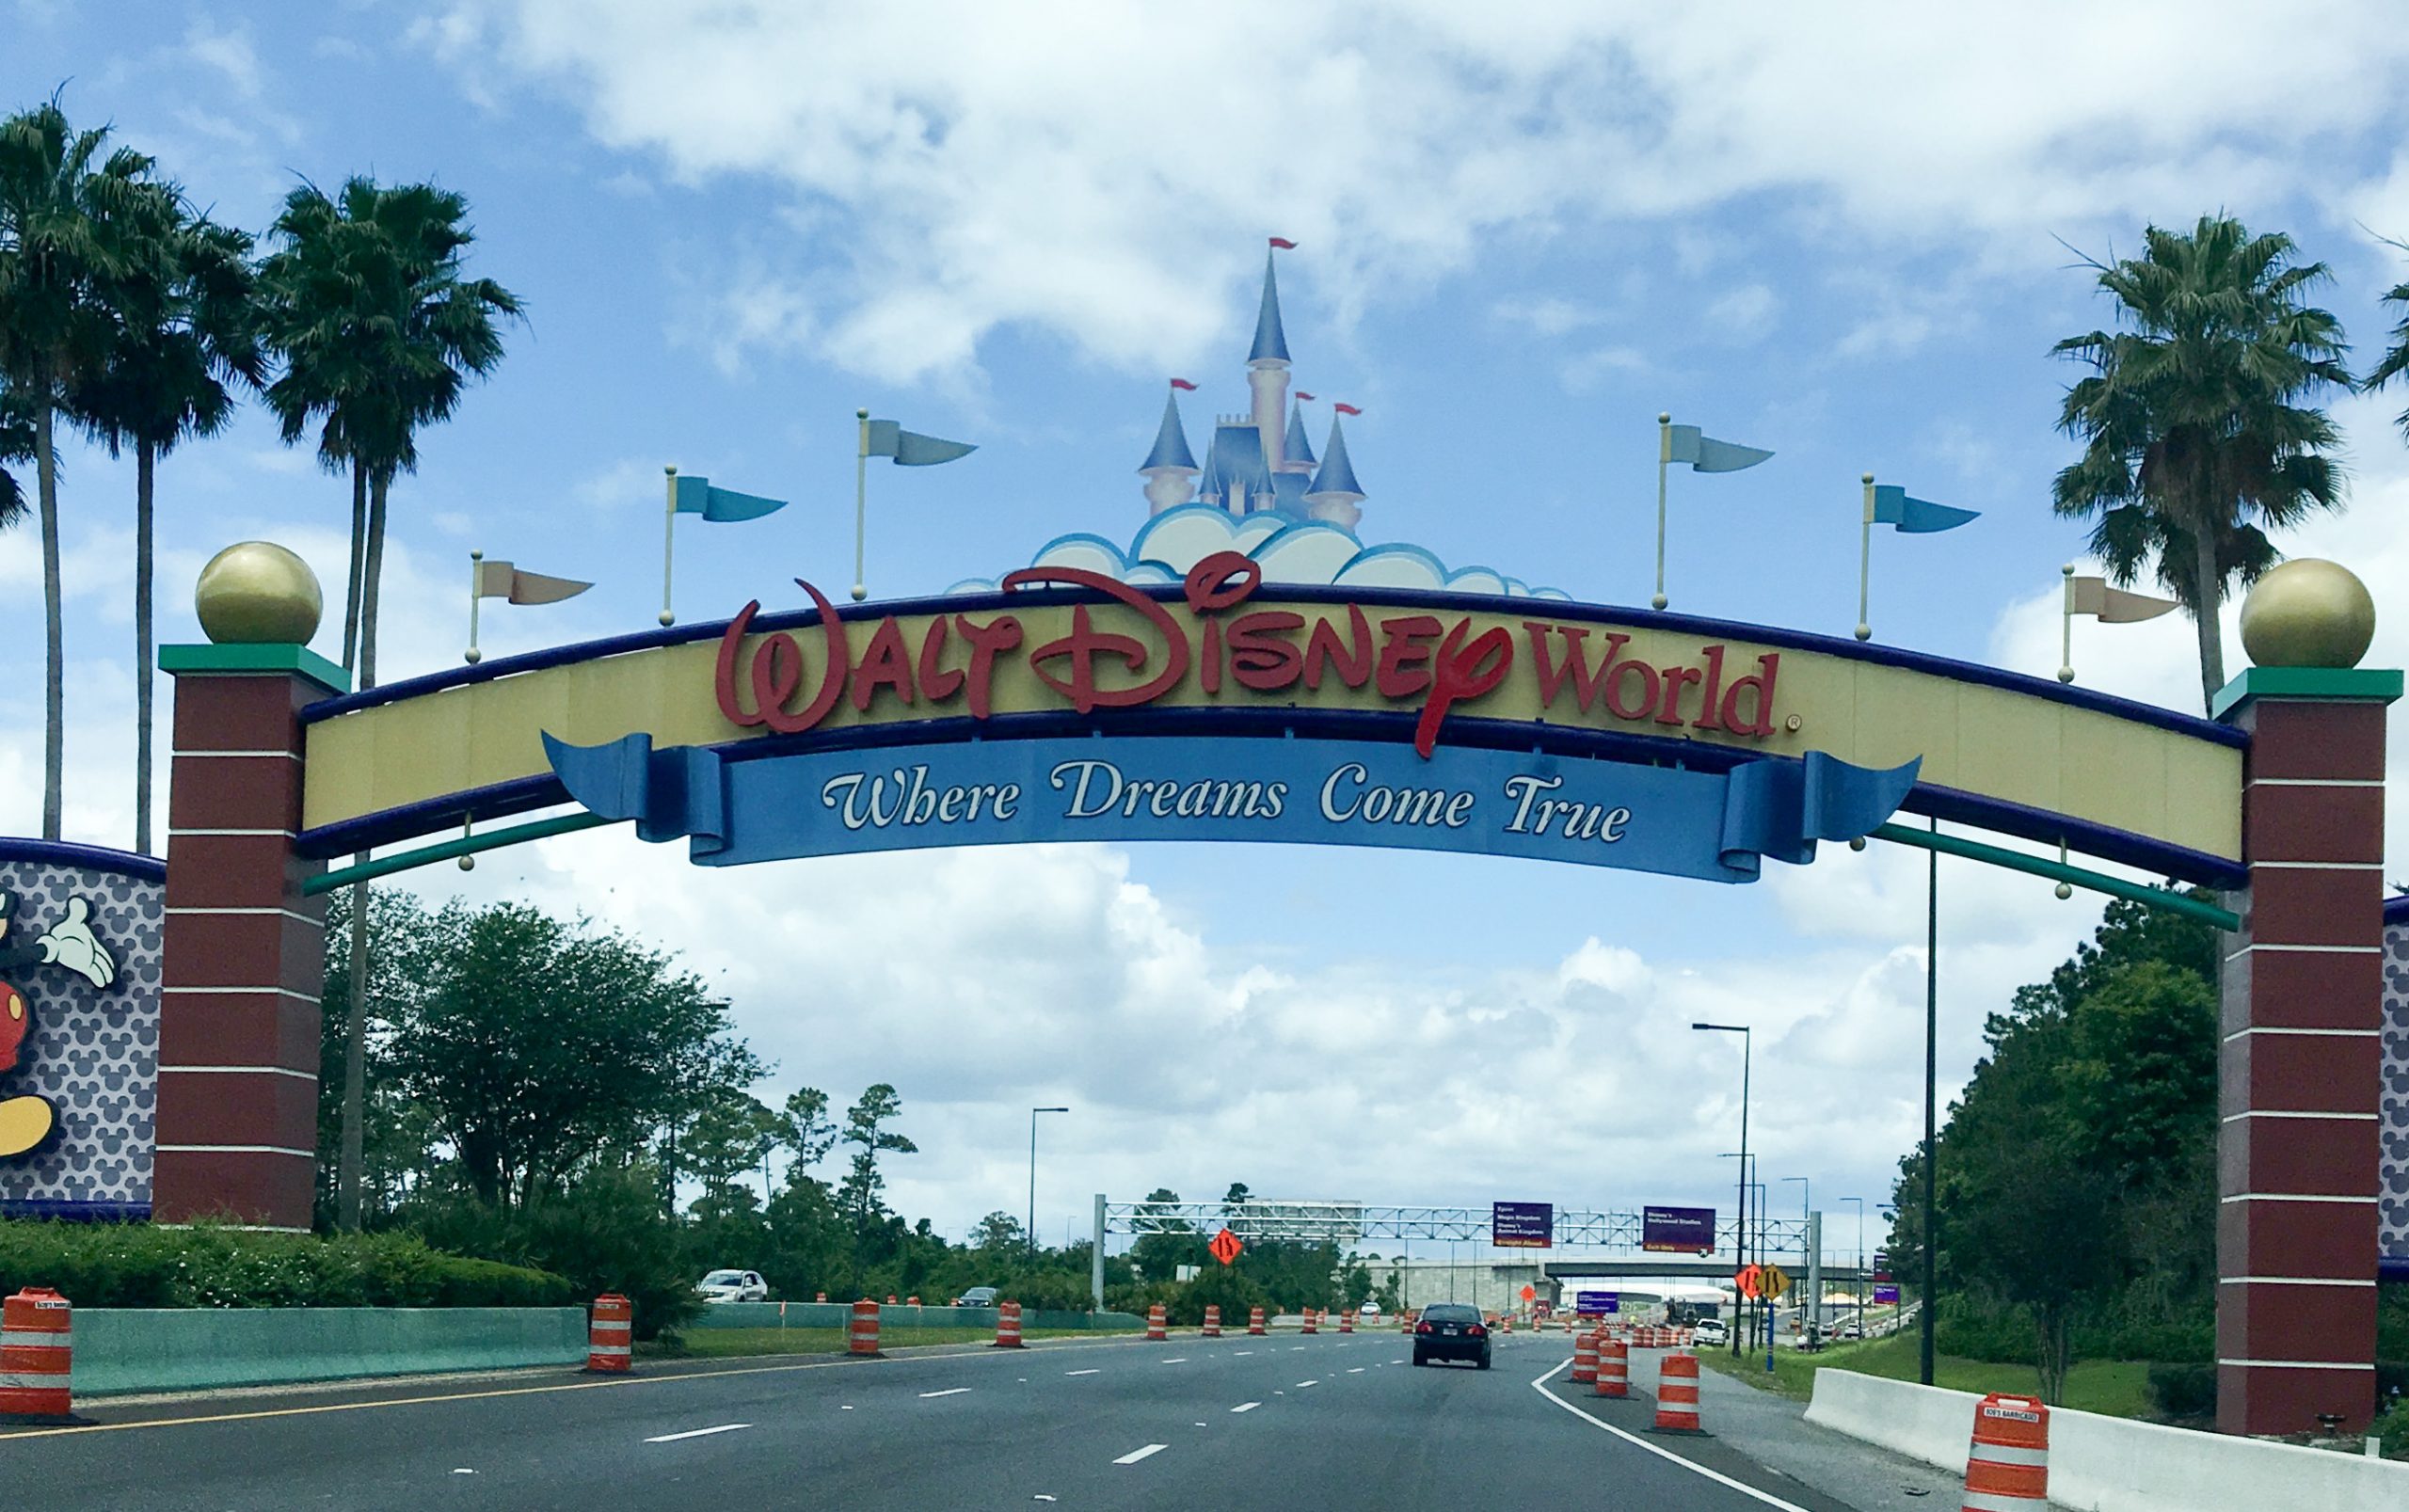 Actors’ Equity Association Rejects Safety Plan for Walt Disney World Performers